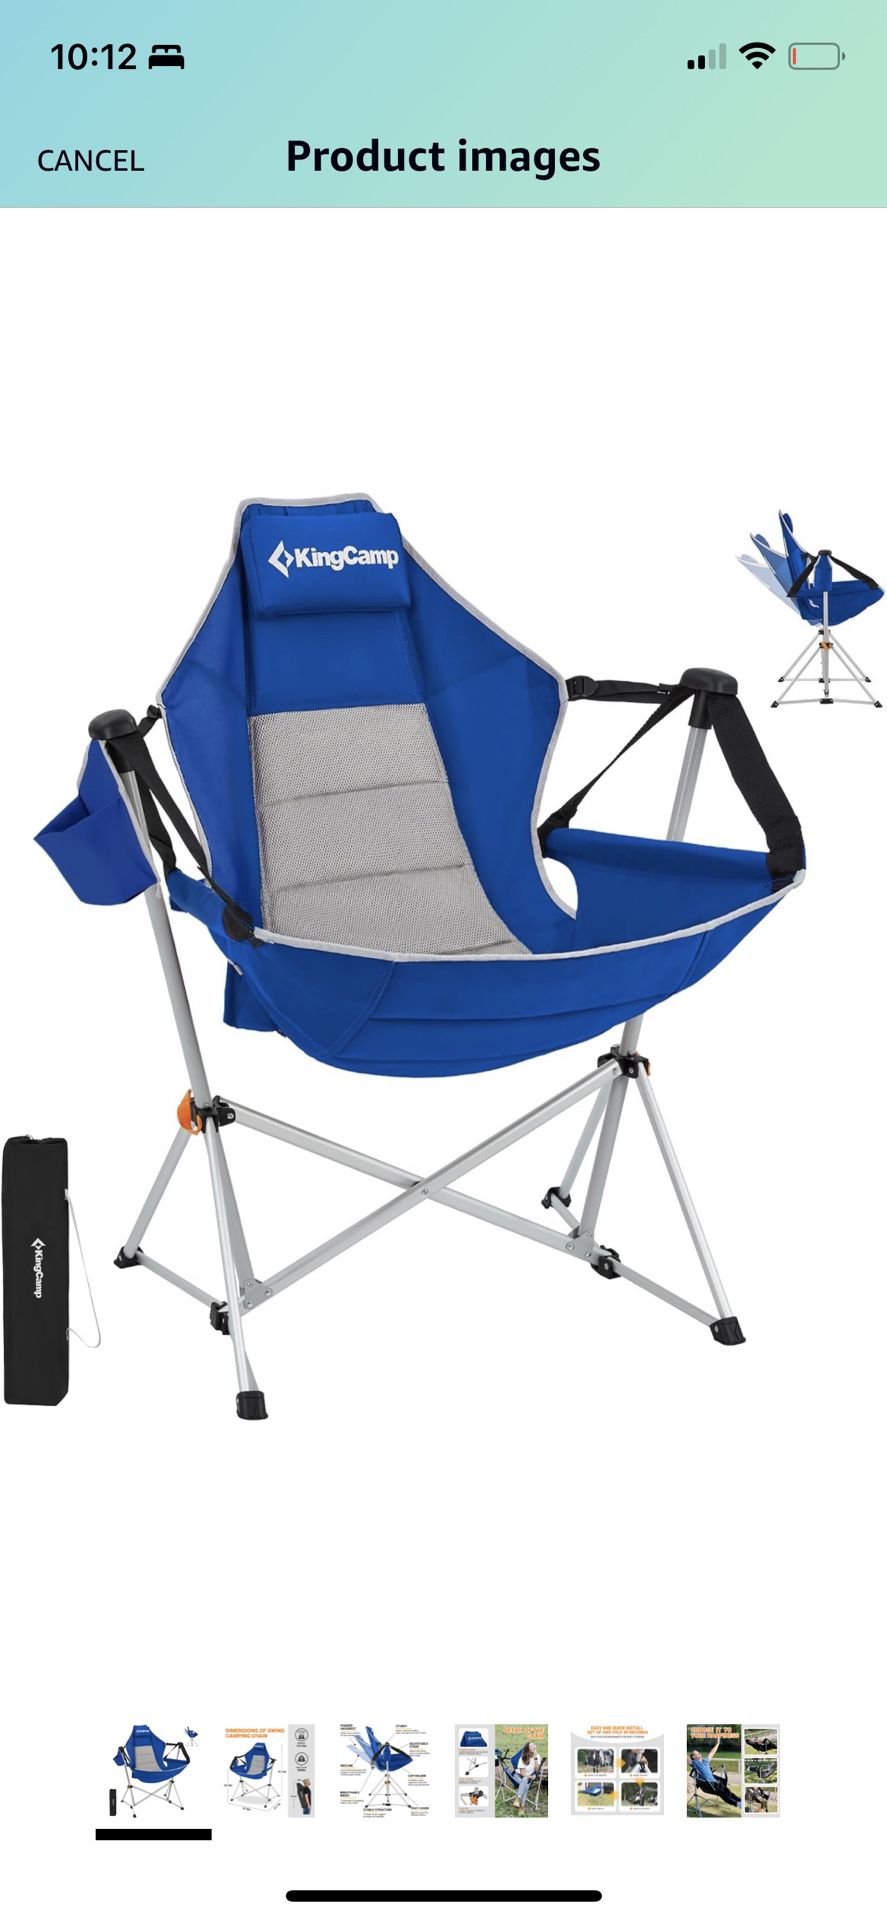 KingCamp Hammock Camping Chair Swinging Recliner Chair for Backyard Lawn Beach Camp Outside Indoor Adults Portable Lounger Folding Chair, 265 Lbs